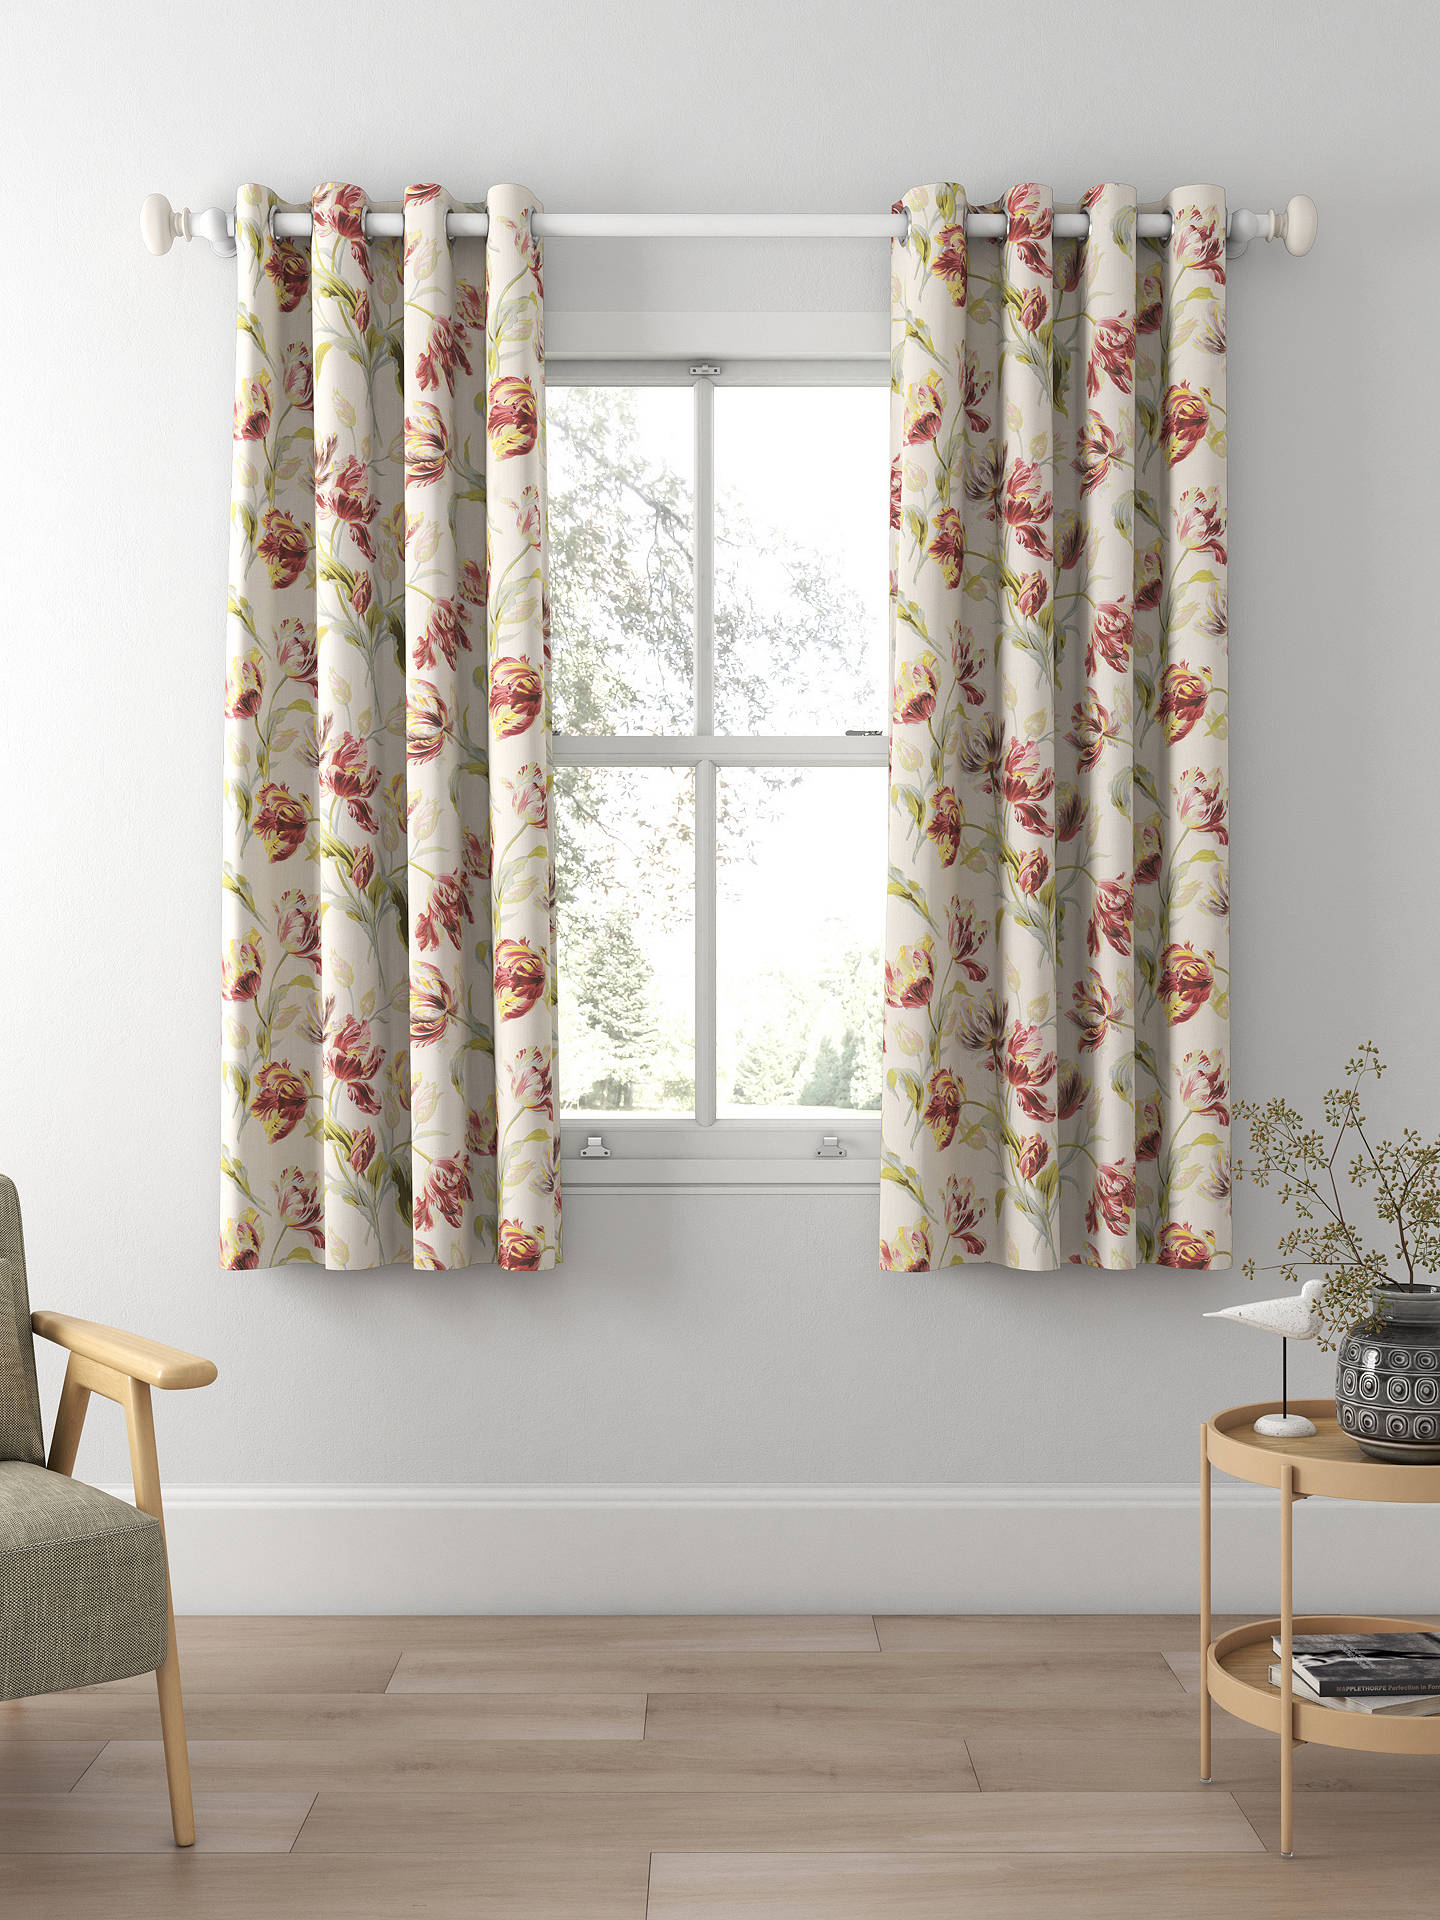 Laura Ashley Gosford Meadow Made to Measure Curtains, Cranberry